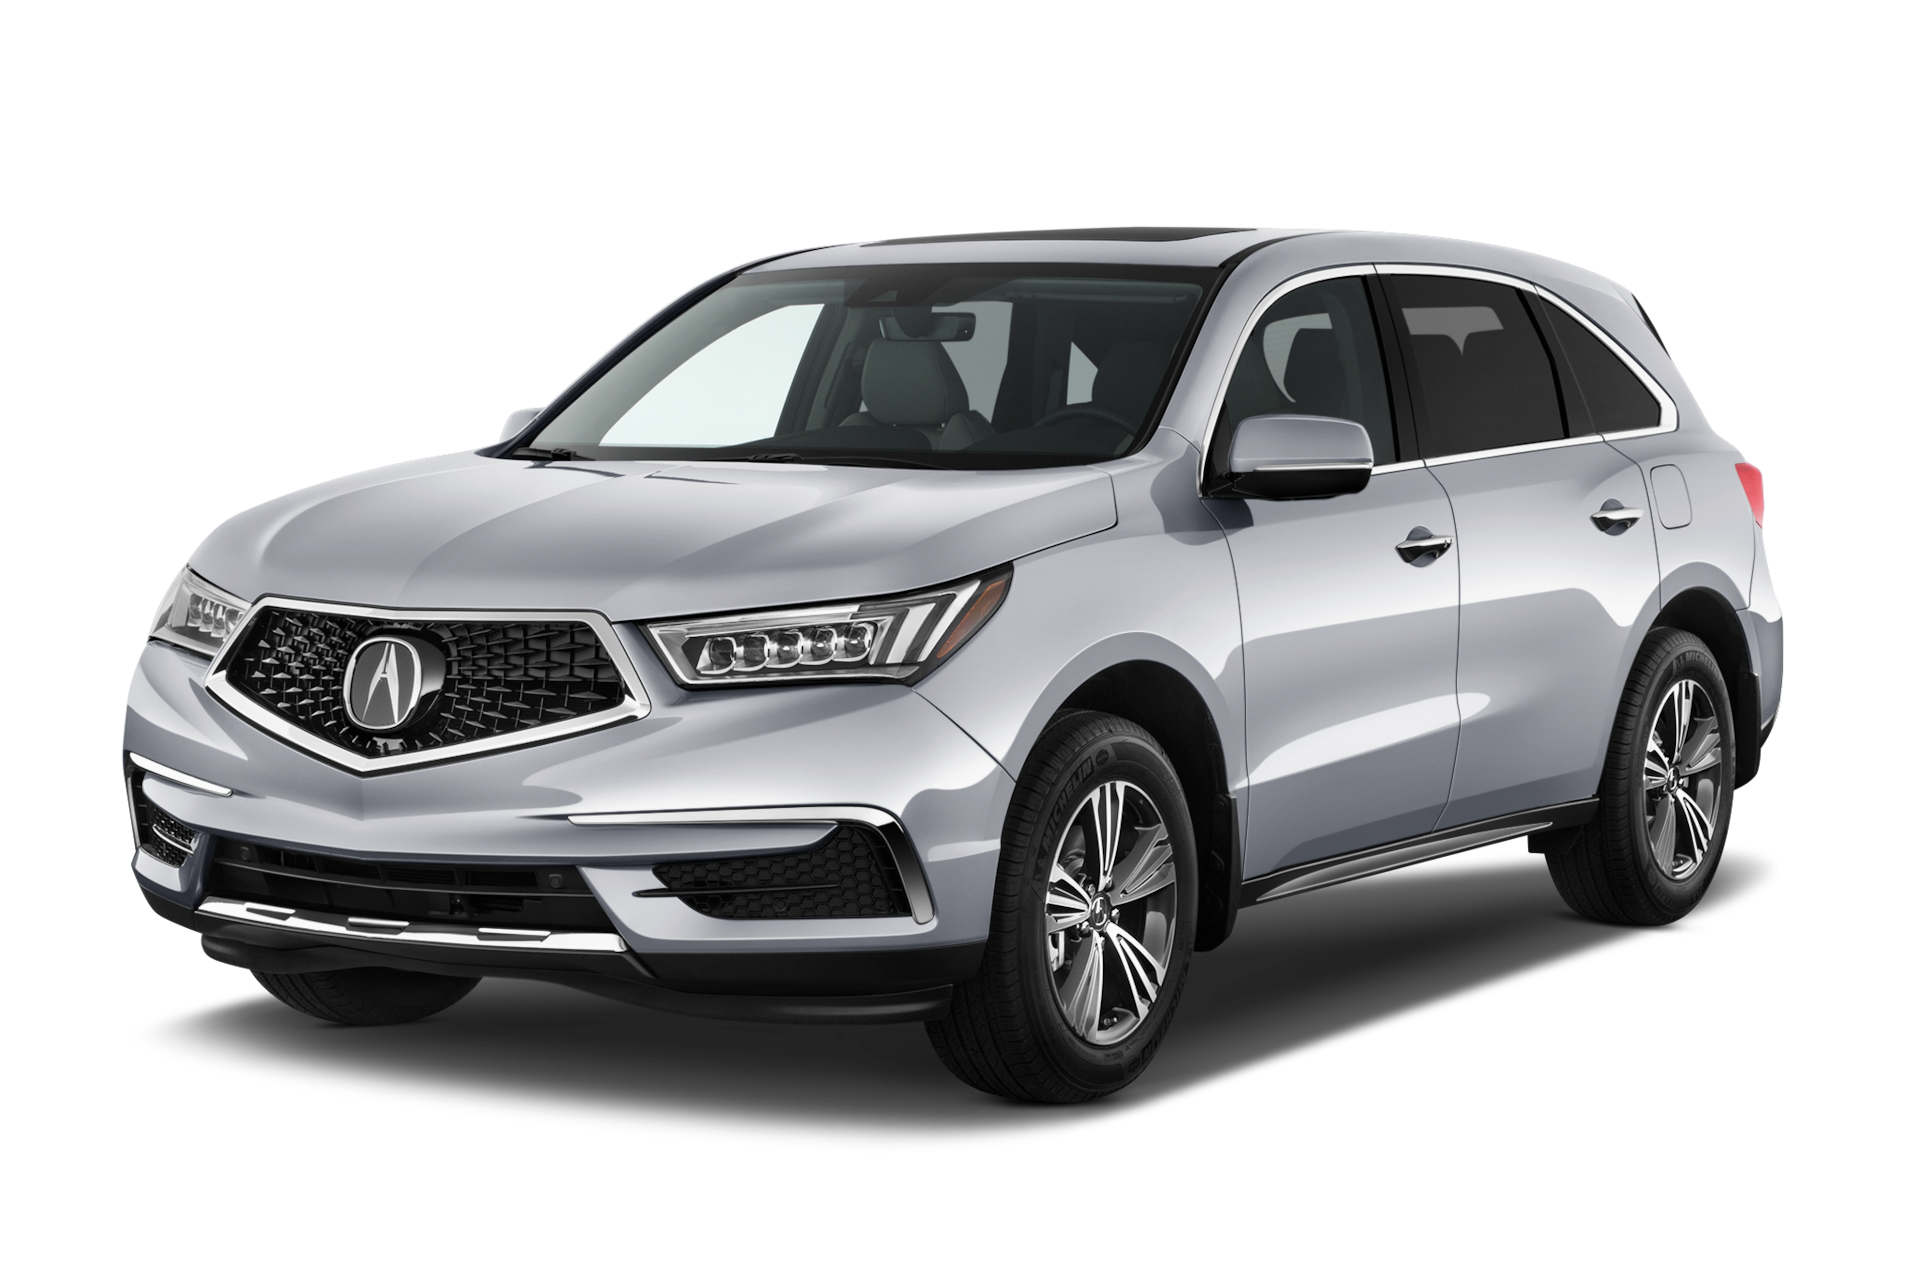 2017 Acura MDX Prices, Reviews, and Photos - MotorTrend